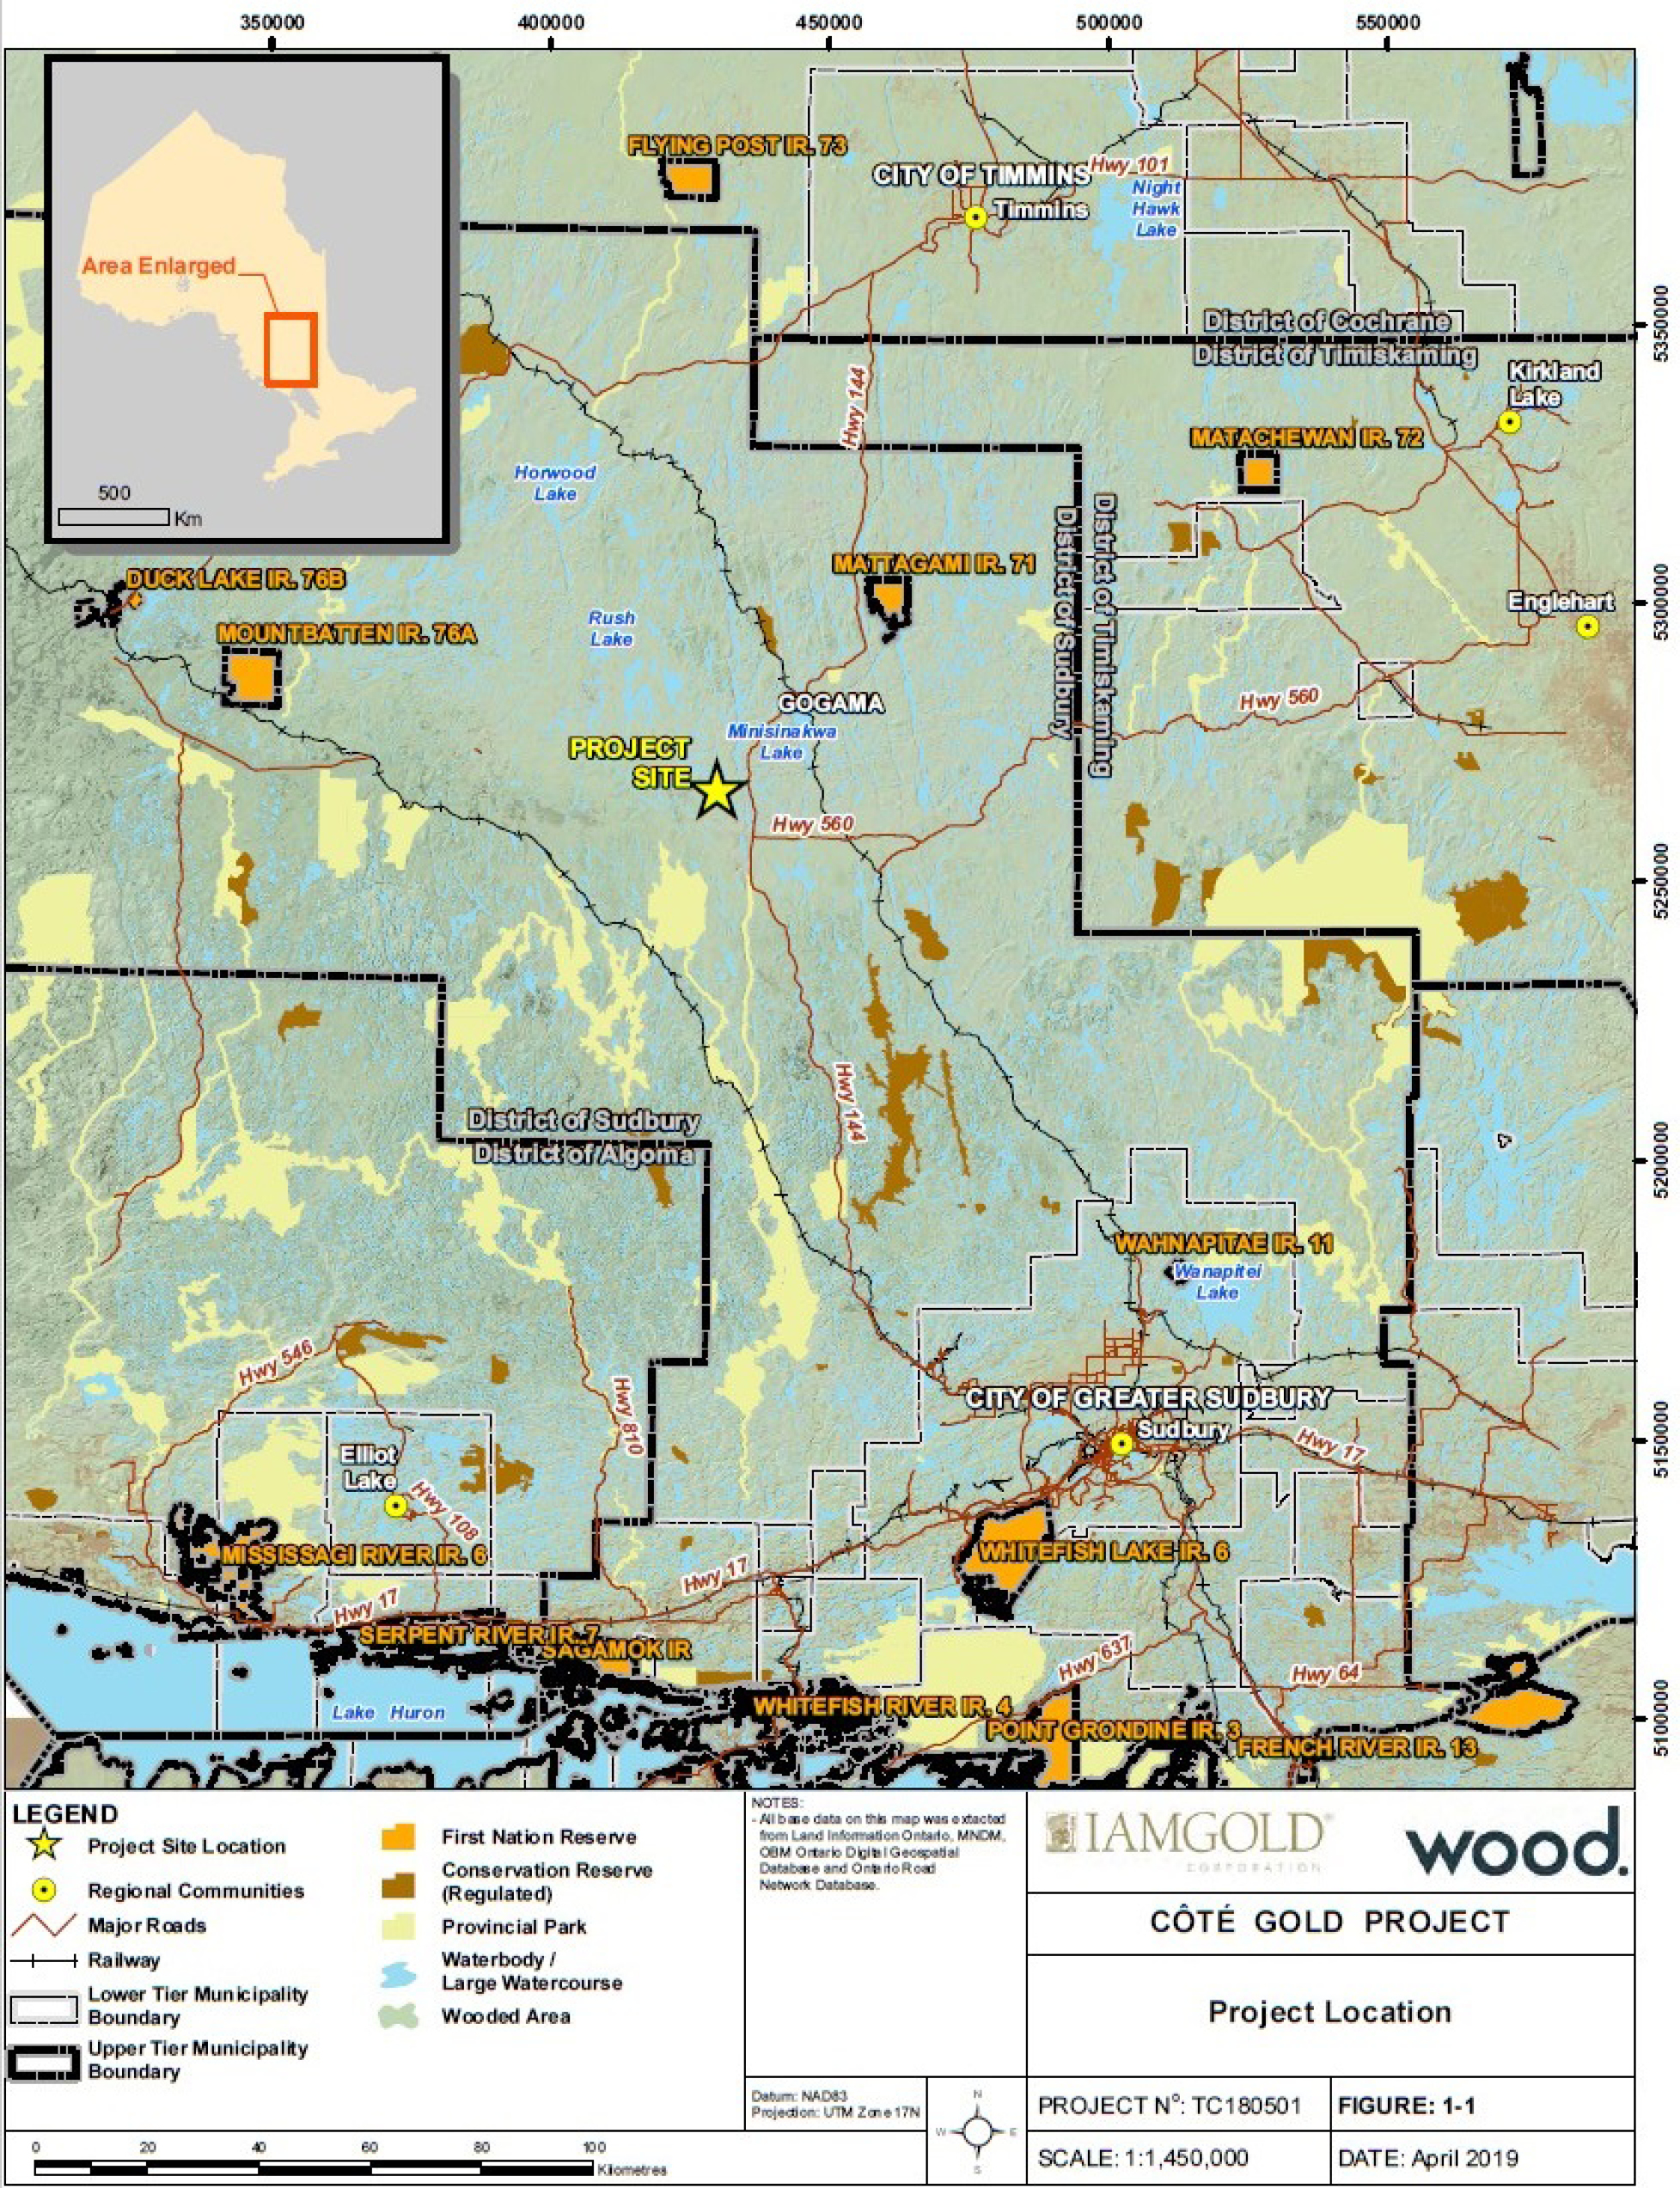 A 1:1,450,000 scale map shows the general location of the Côté Gold Mine Project in Ontario - Description below